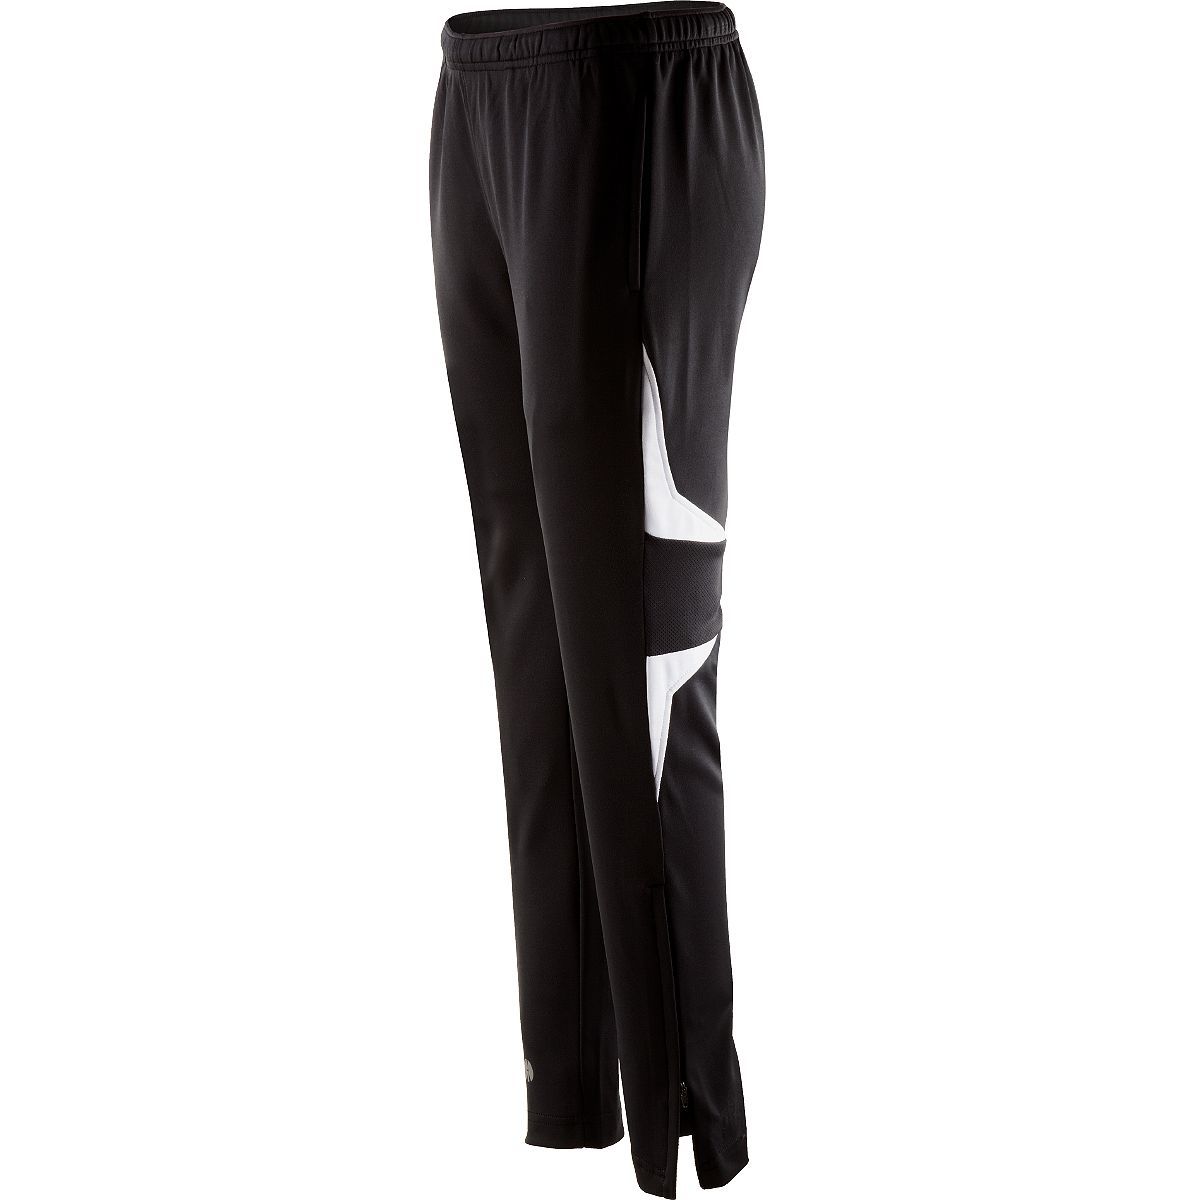 Holloway Ladies Traction Pant in Black/Black/White  -Part of the Ladies, Ladies-Pants, Pants, Holloway product lines at KanaleyCreations.com